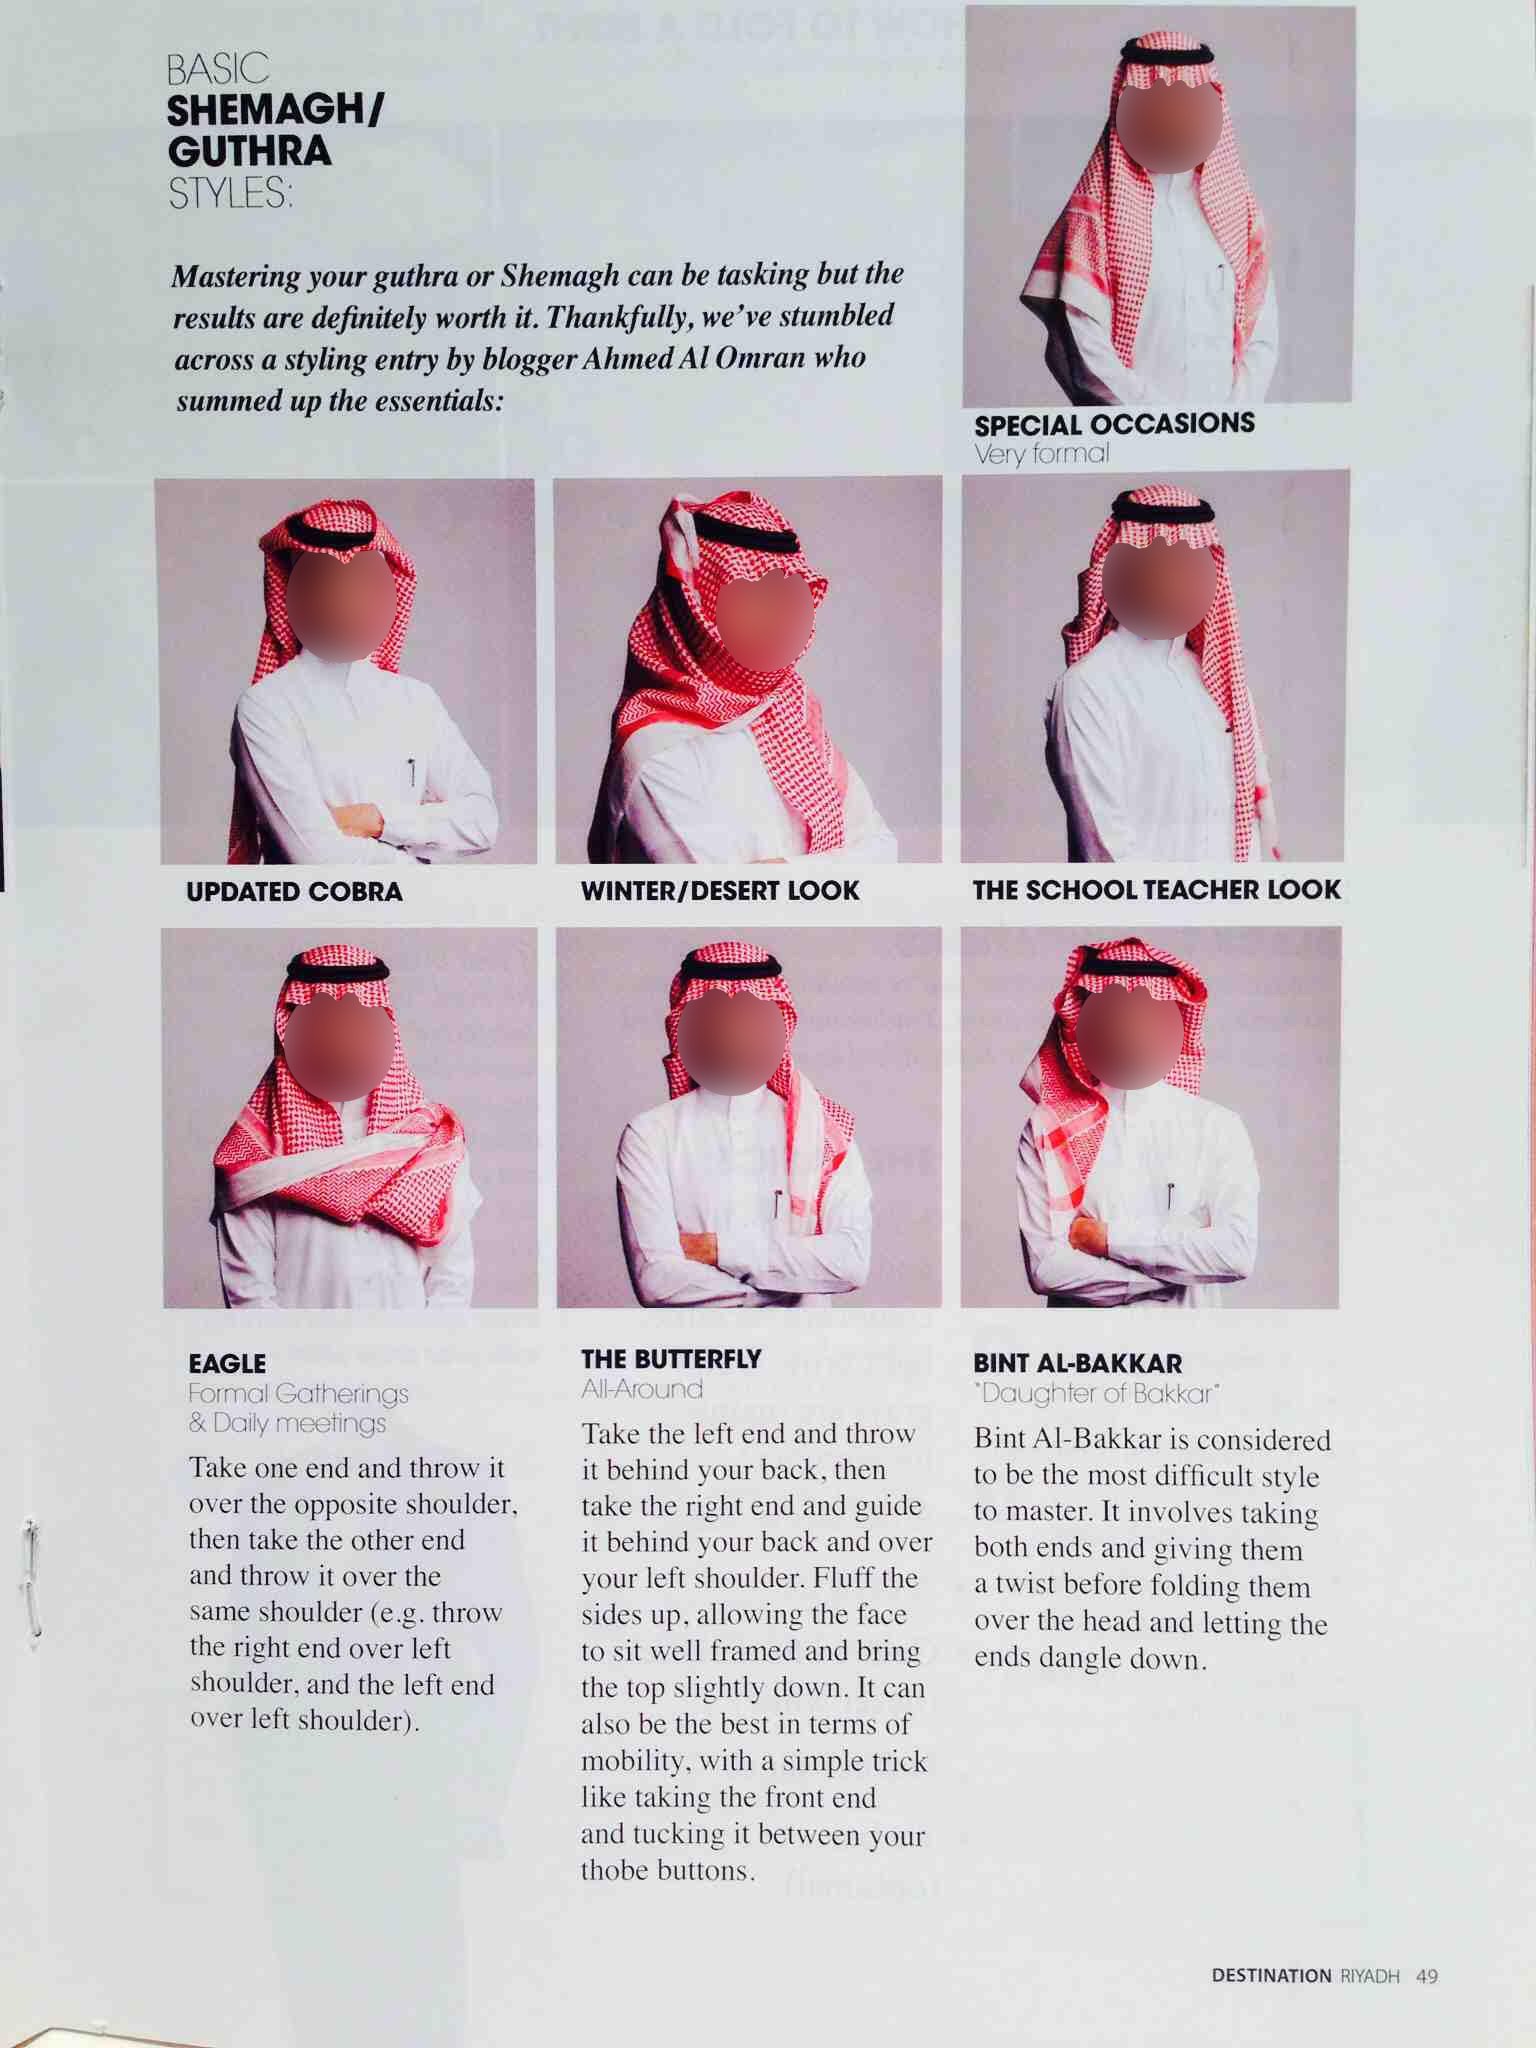 How to wear shemagh saudi style